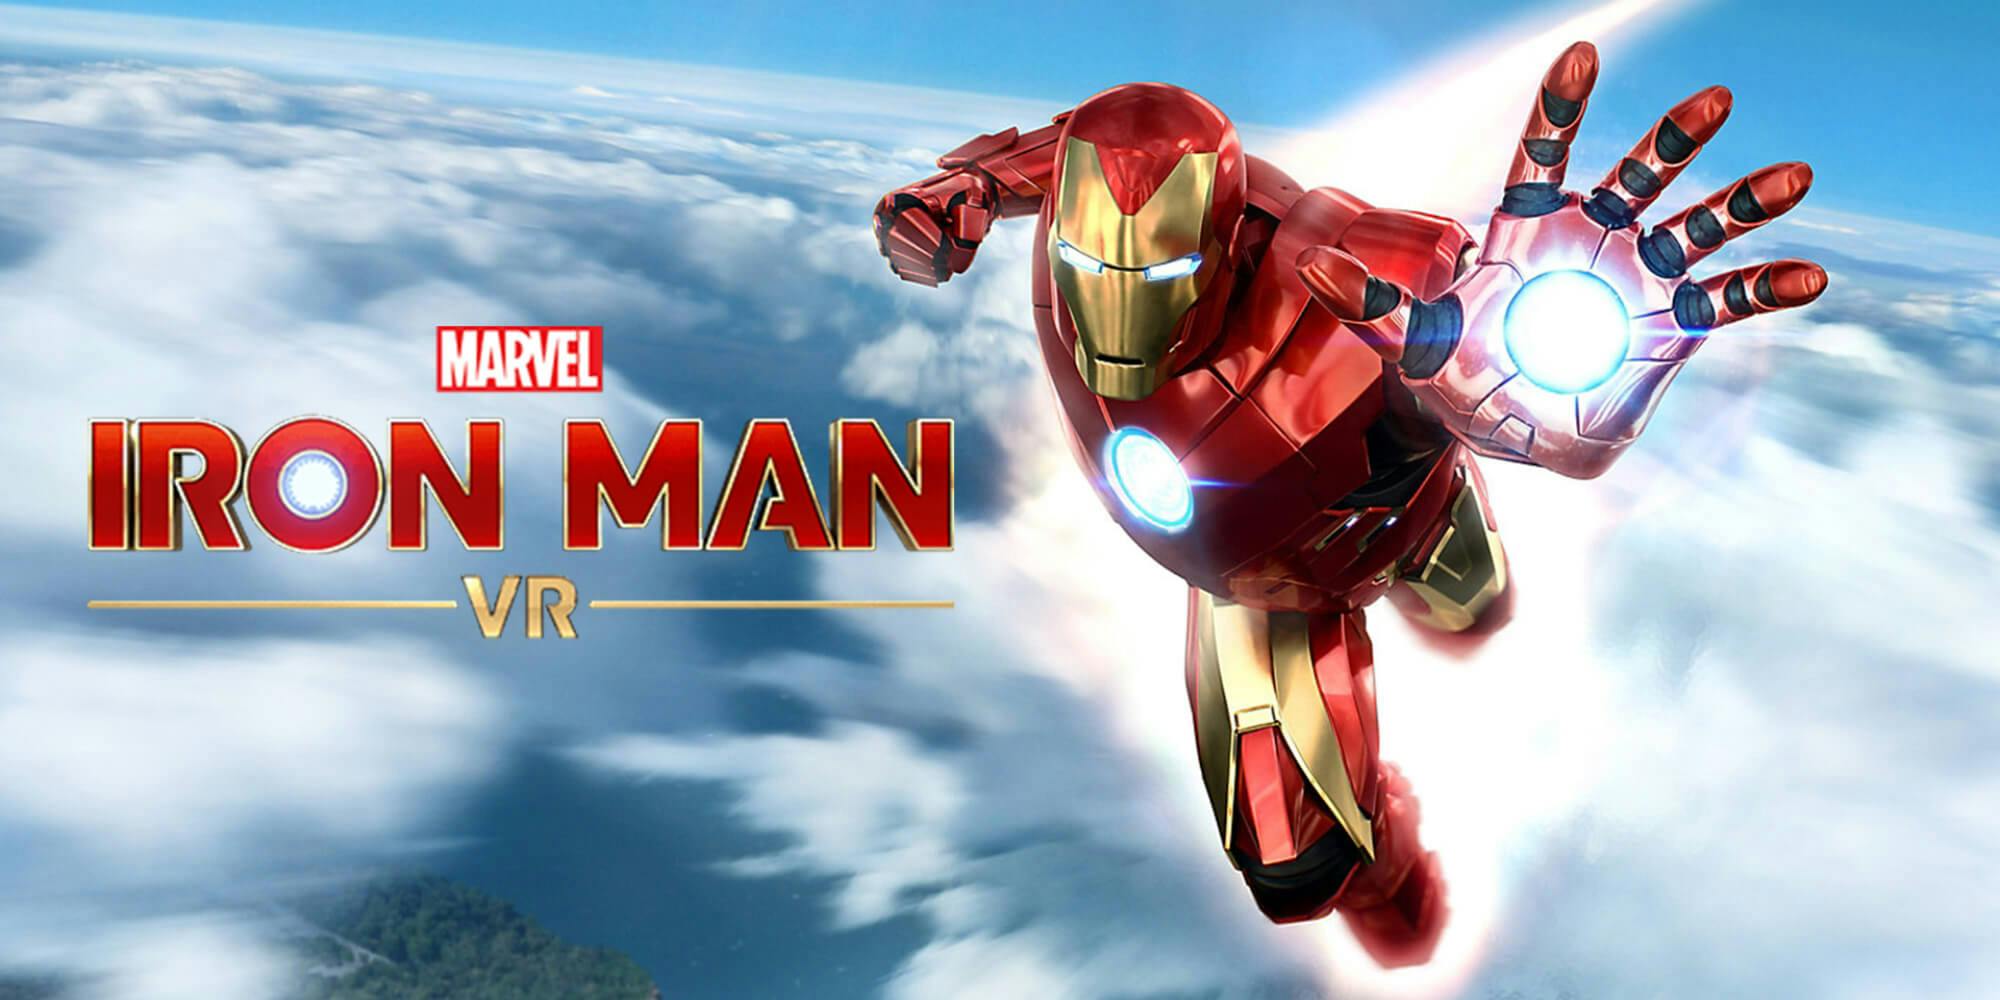 upcoming video games february 2020 marvels iron man vr release date